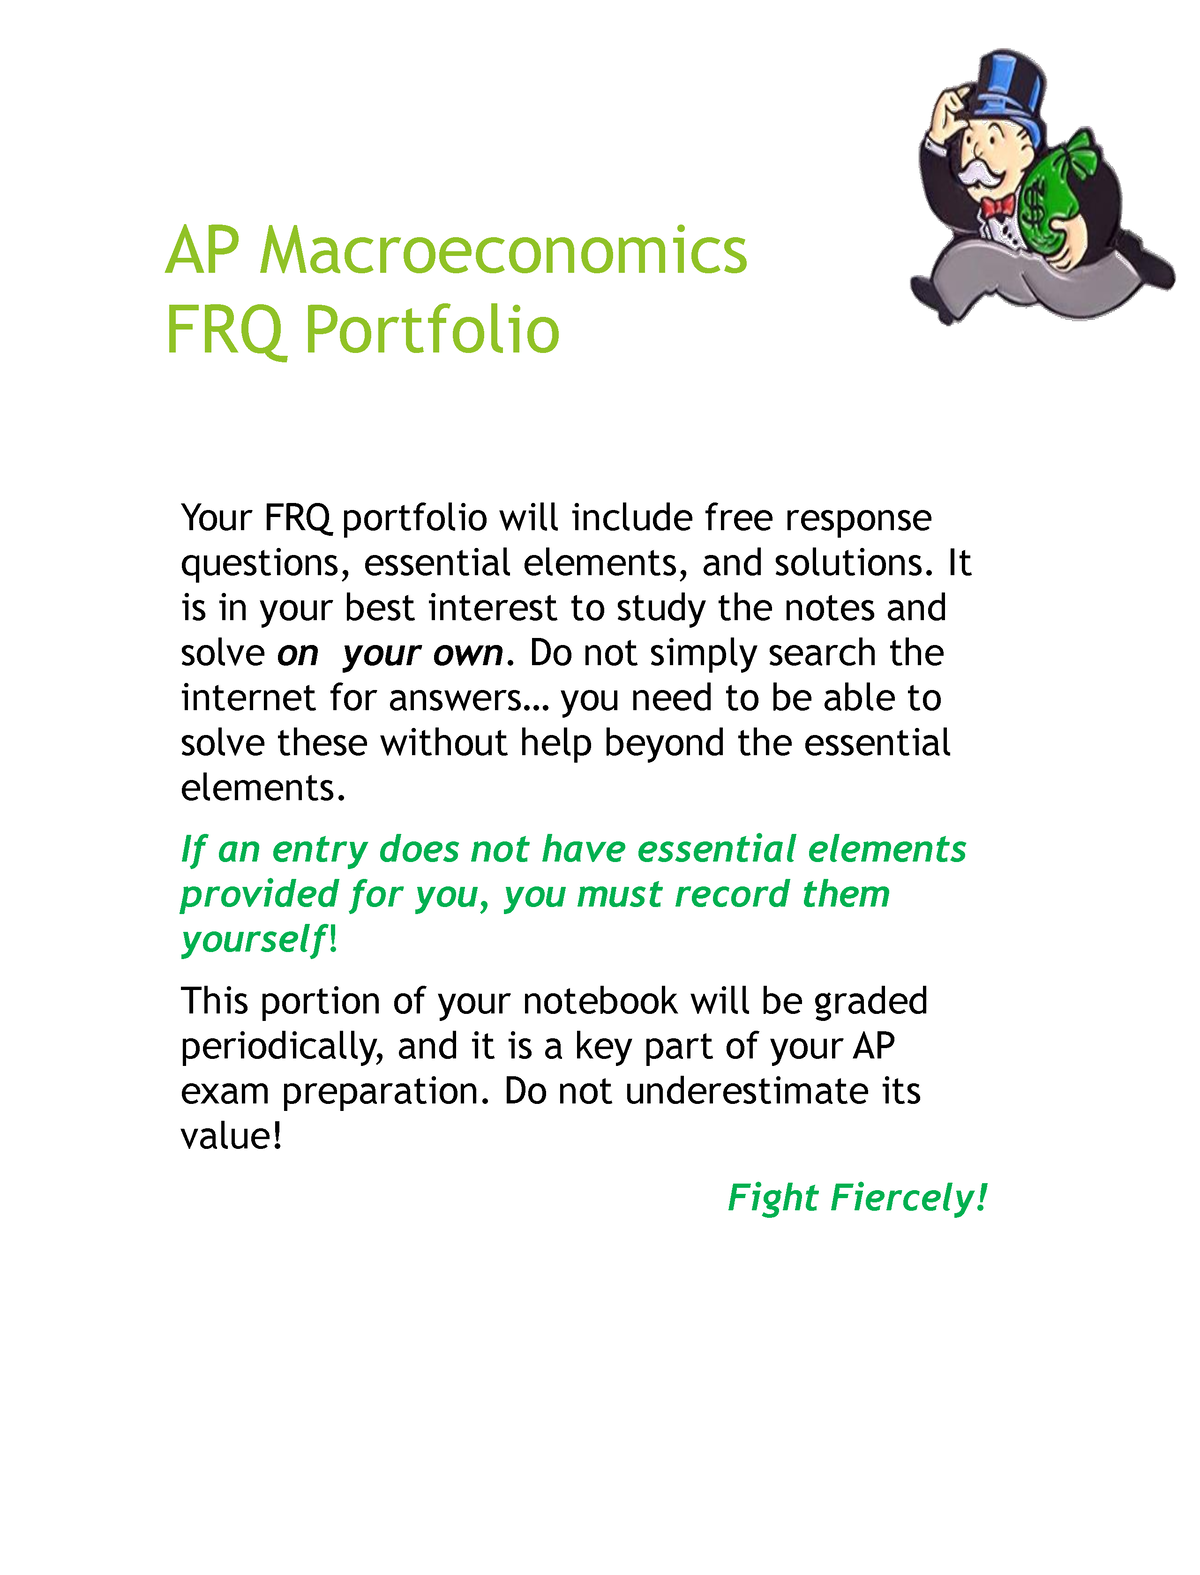 FRQ Portfolio FRQ packets and practice for AP Macro AP